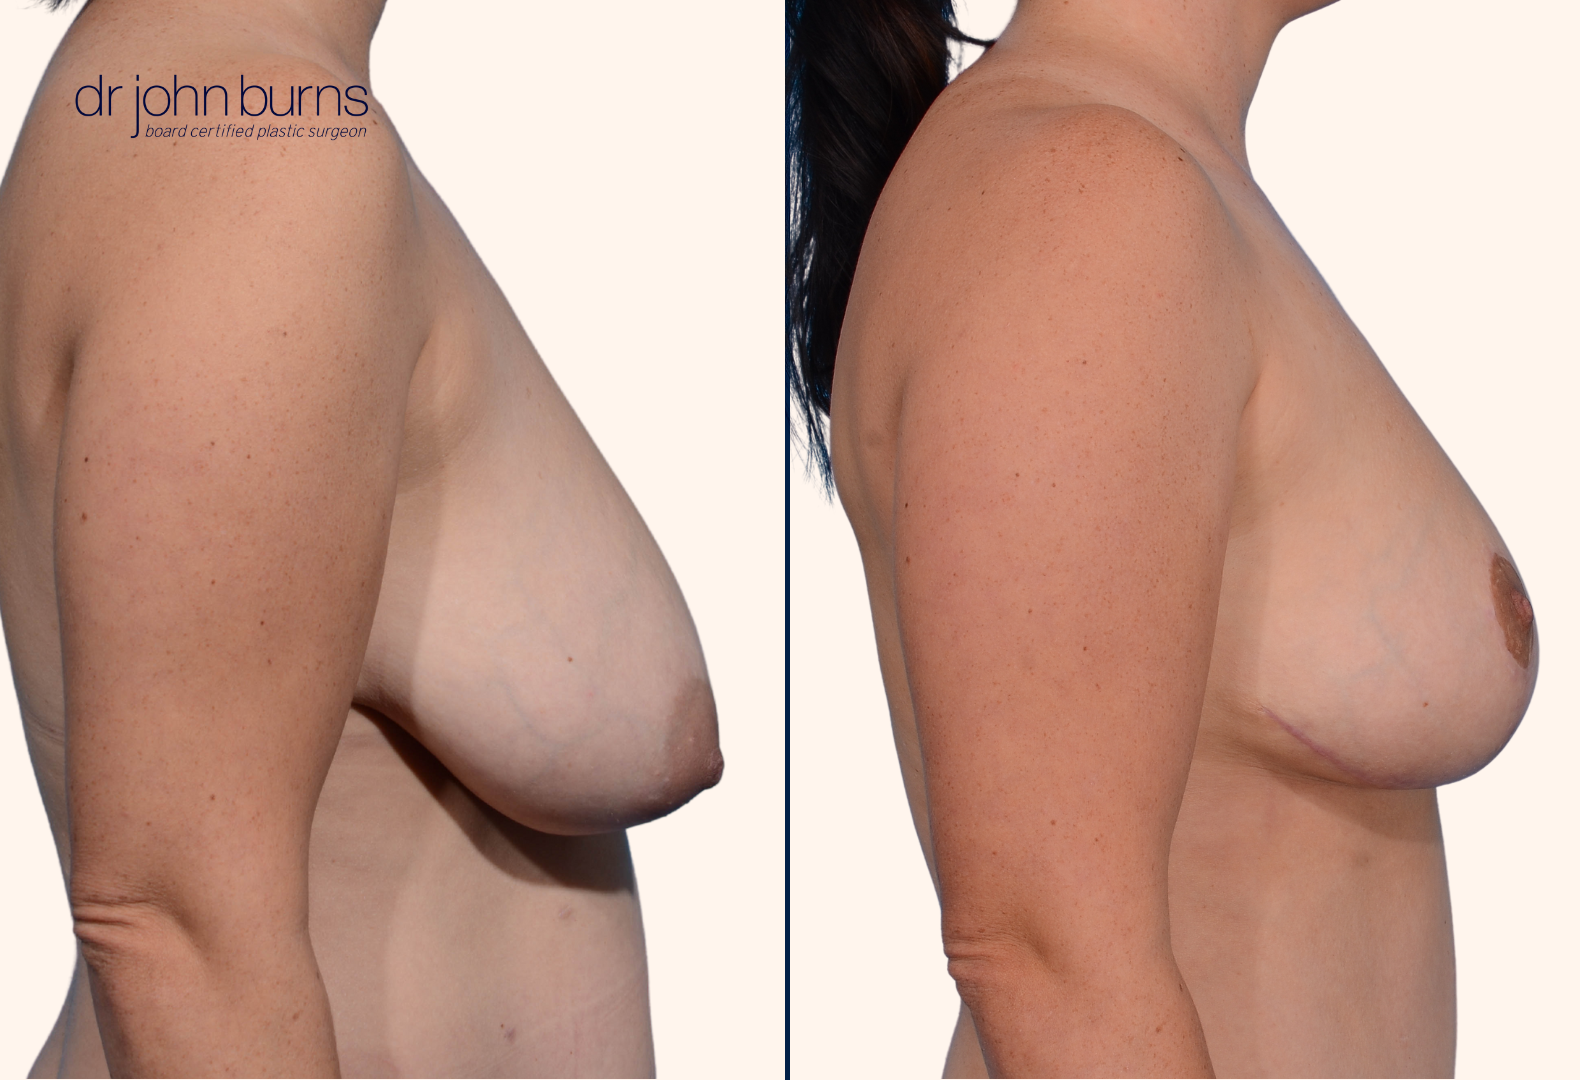 Breast reduction before and after by Dr. John Burns